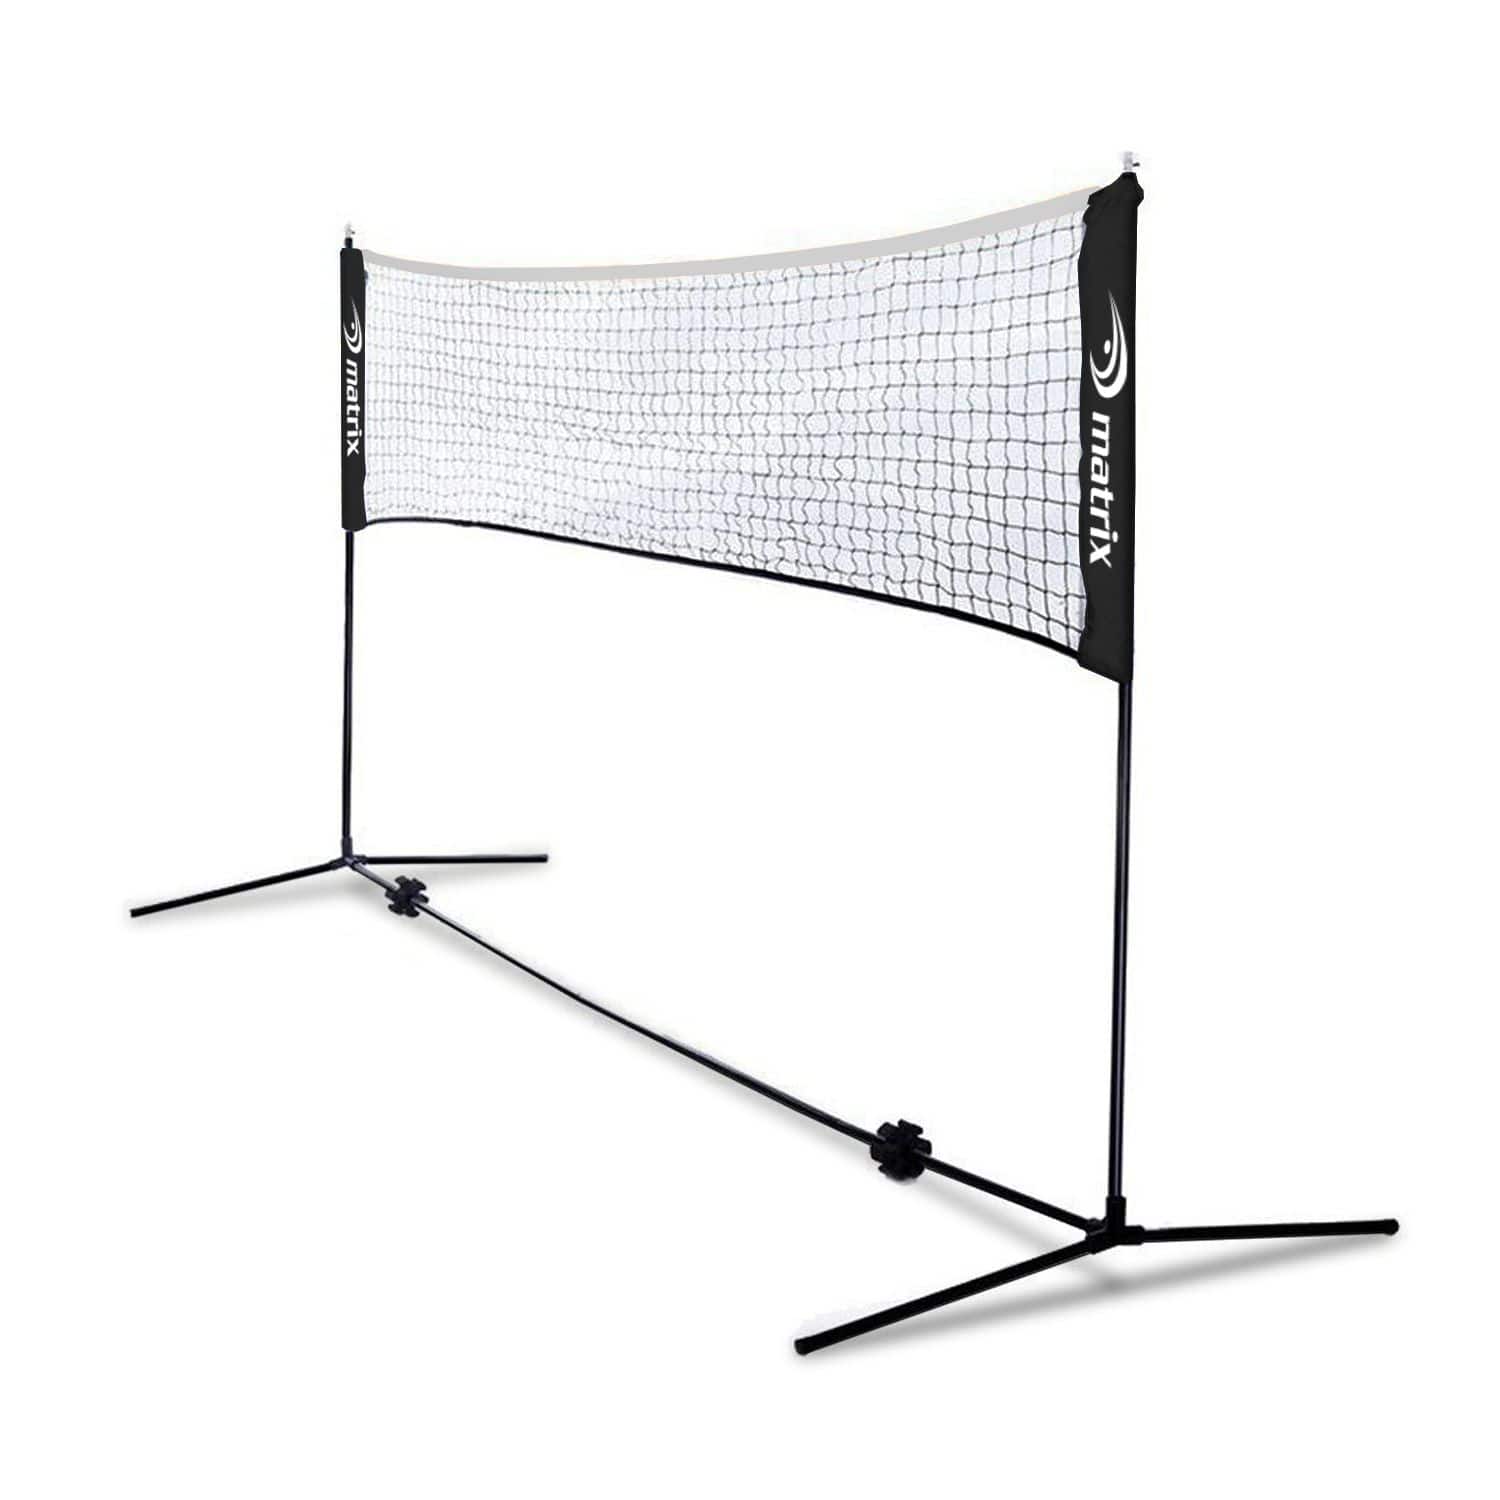 https://media-www.canadiantire.ca/product/playing/team-sports-and-golf/sports-equipment-accessories/1841101/matrix-10-adjustable-combo-net-12bb6a1f-2af2-4092-bb3d-089e30c82608-jpgrendition.jpg